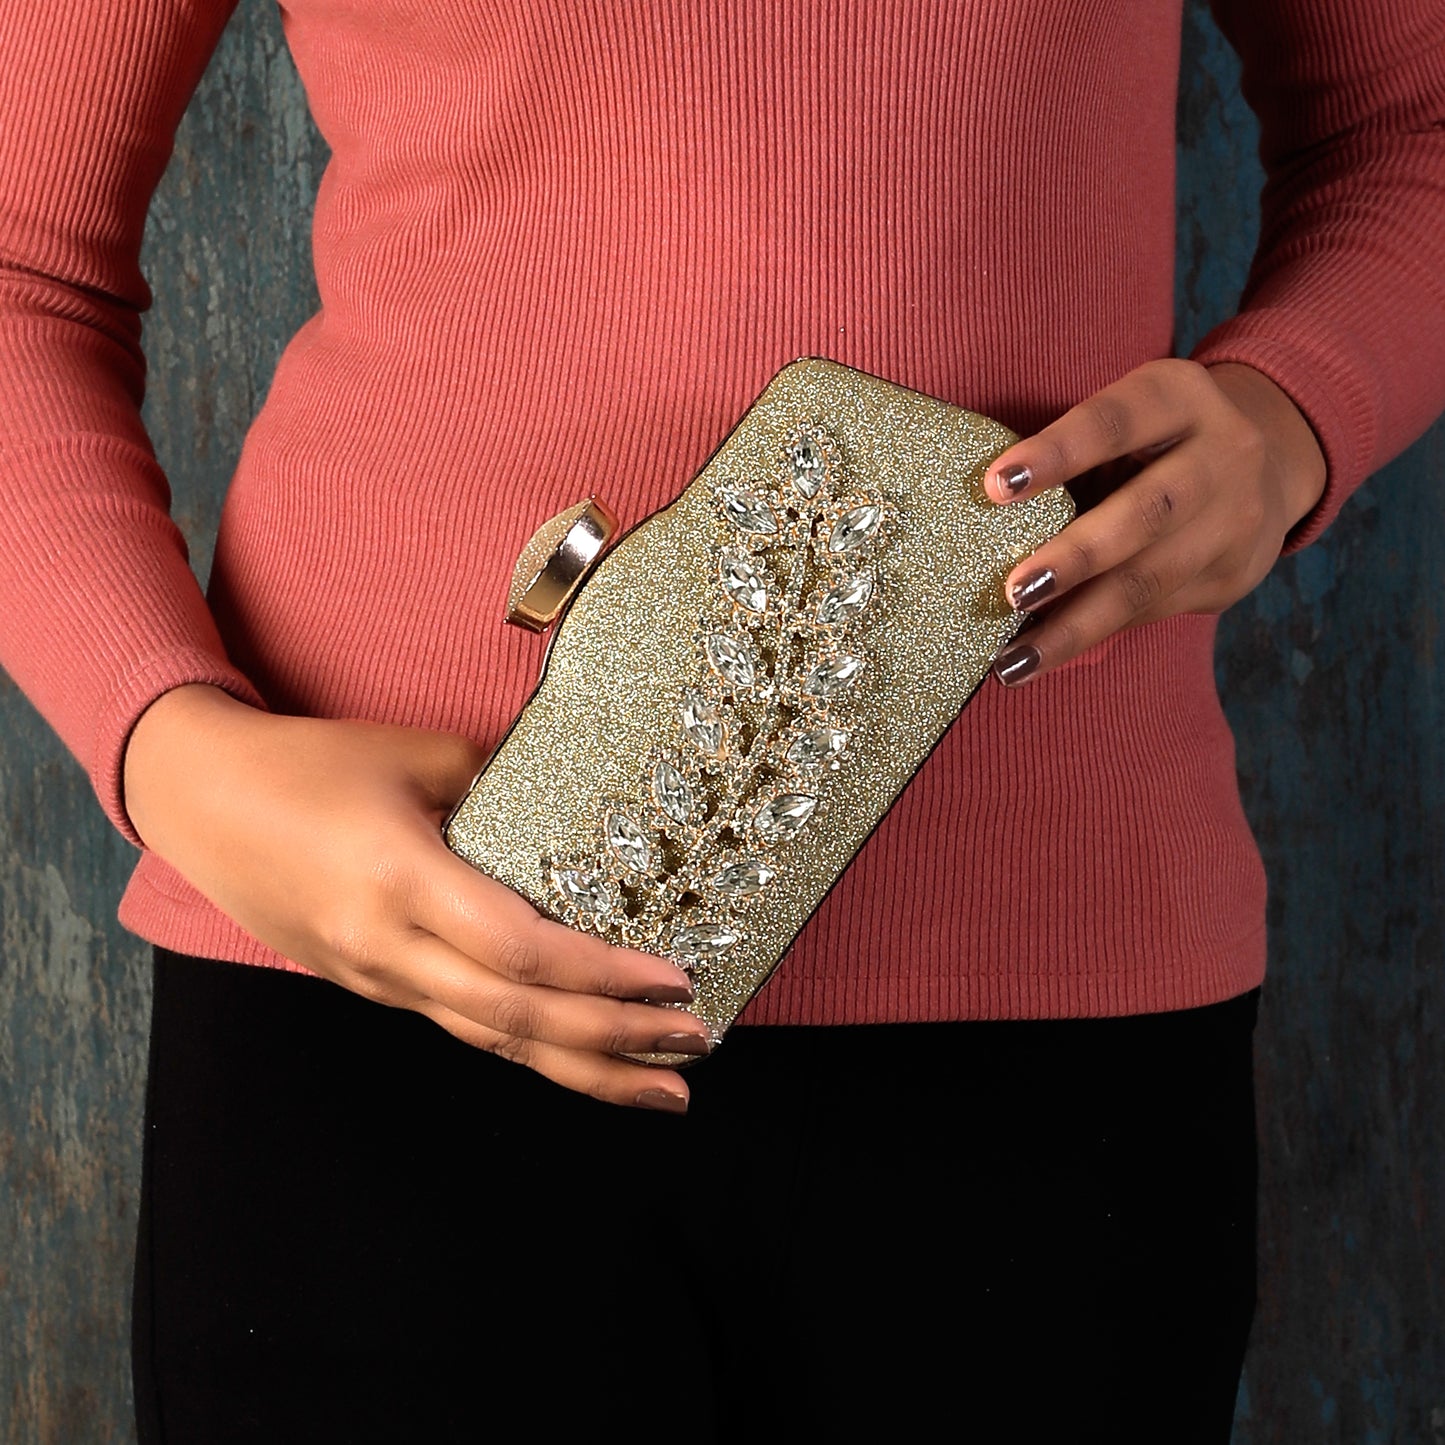 The Golden Gleamy Sea Bed Clutch